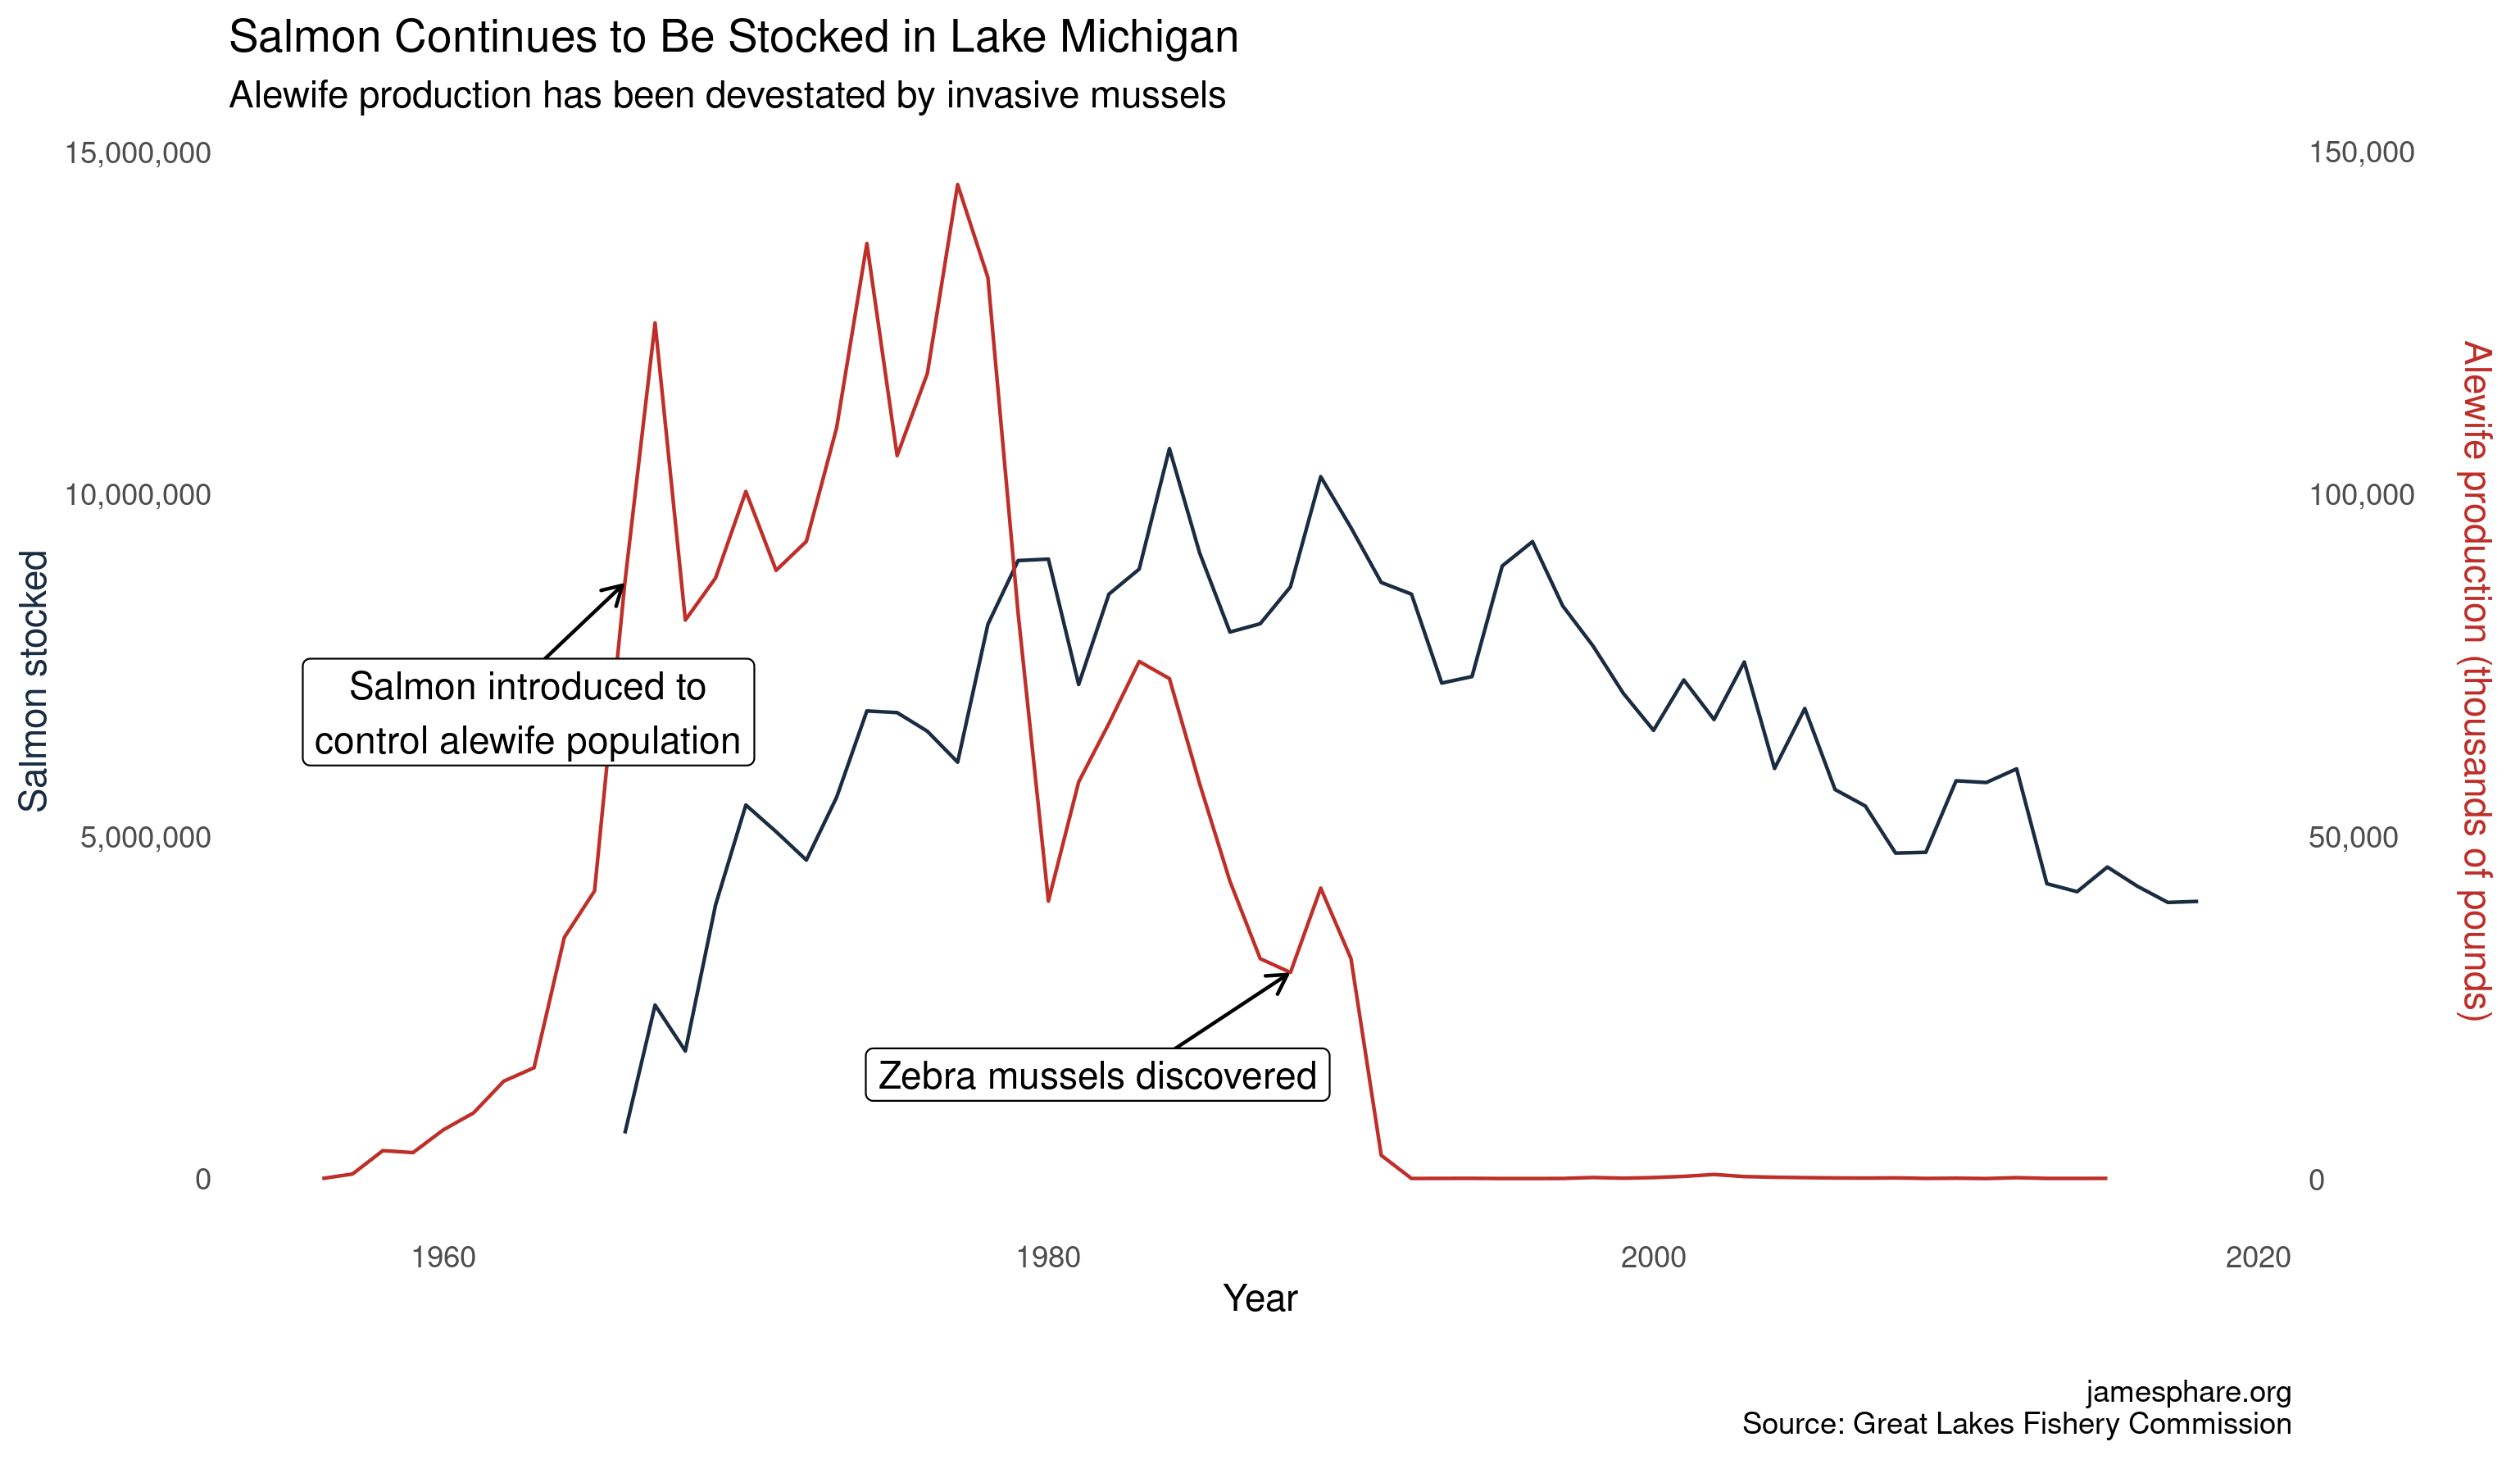 Line chart showing salmon stocking and alewife production in Lake Michigan. The introduction of salmon had only a modest impact on alewife production, but invasive mussels later caused alewife production to collapse